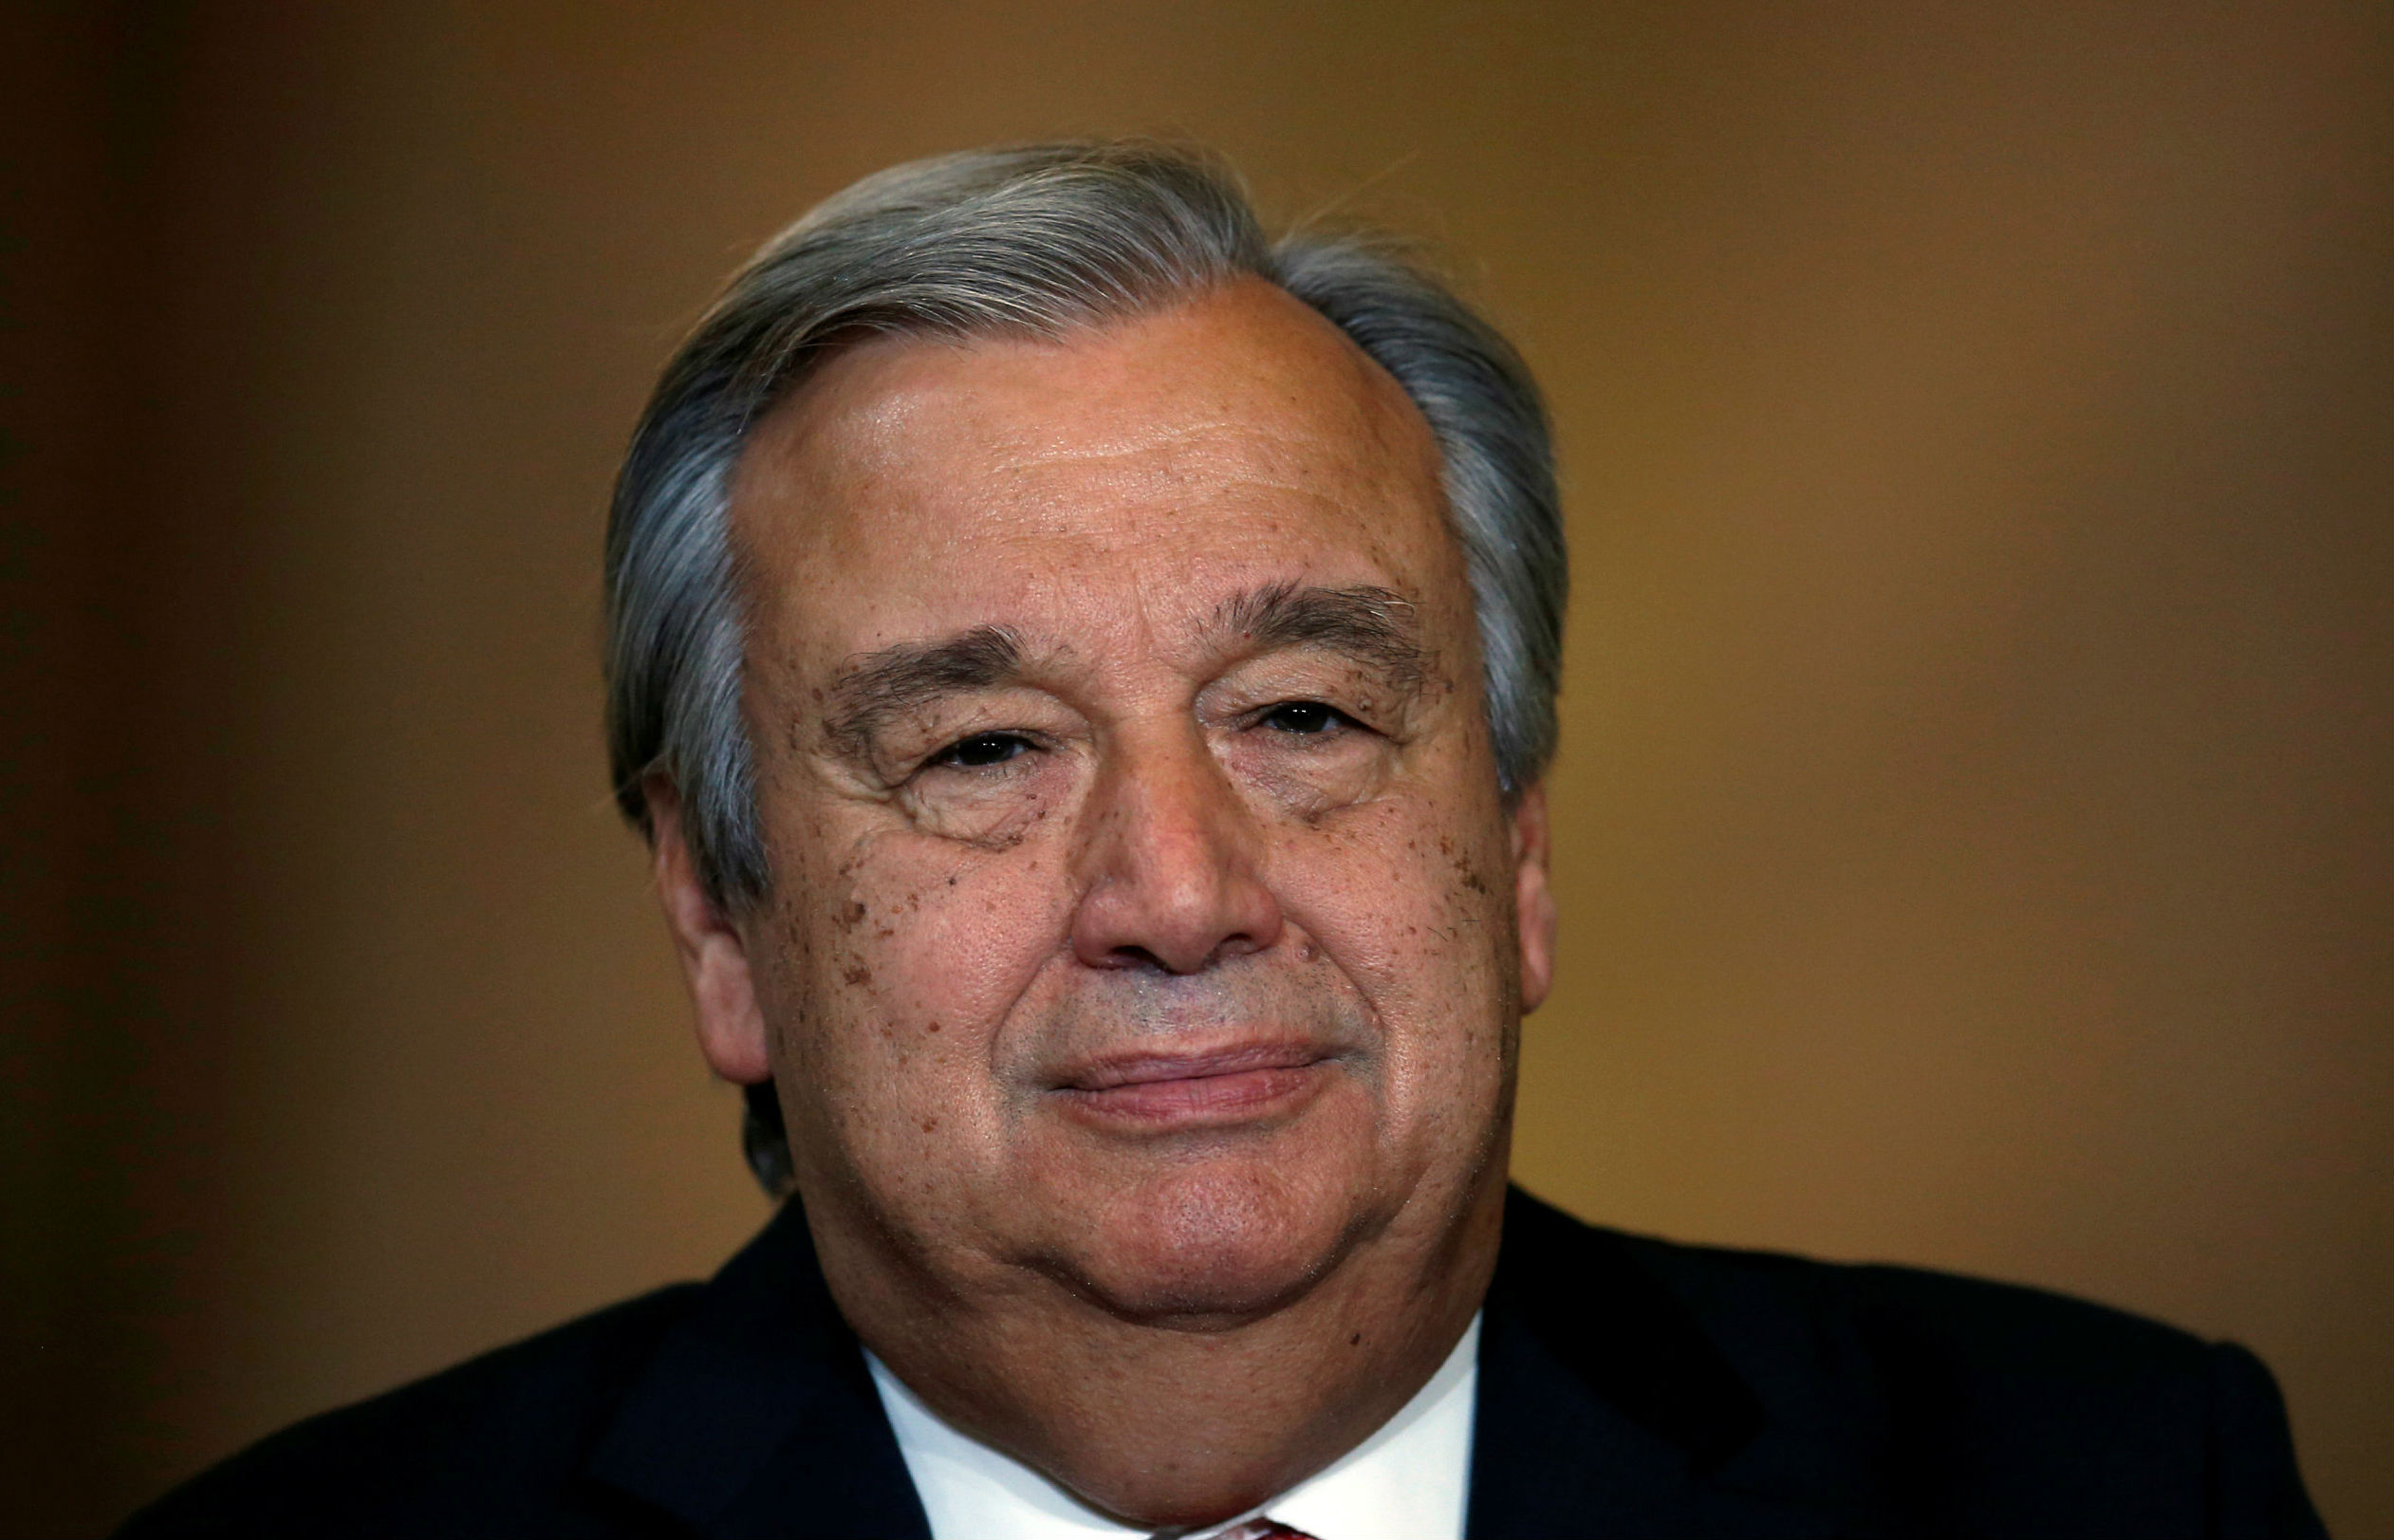 Profile: António Guterres, the Catholic tipped to be the new head of the UN